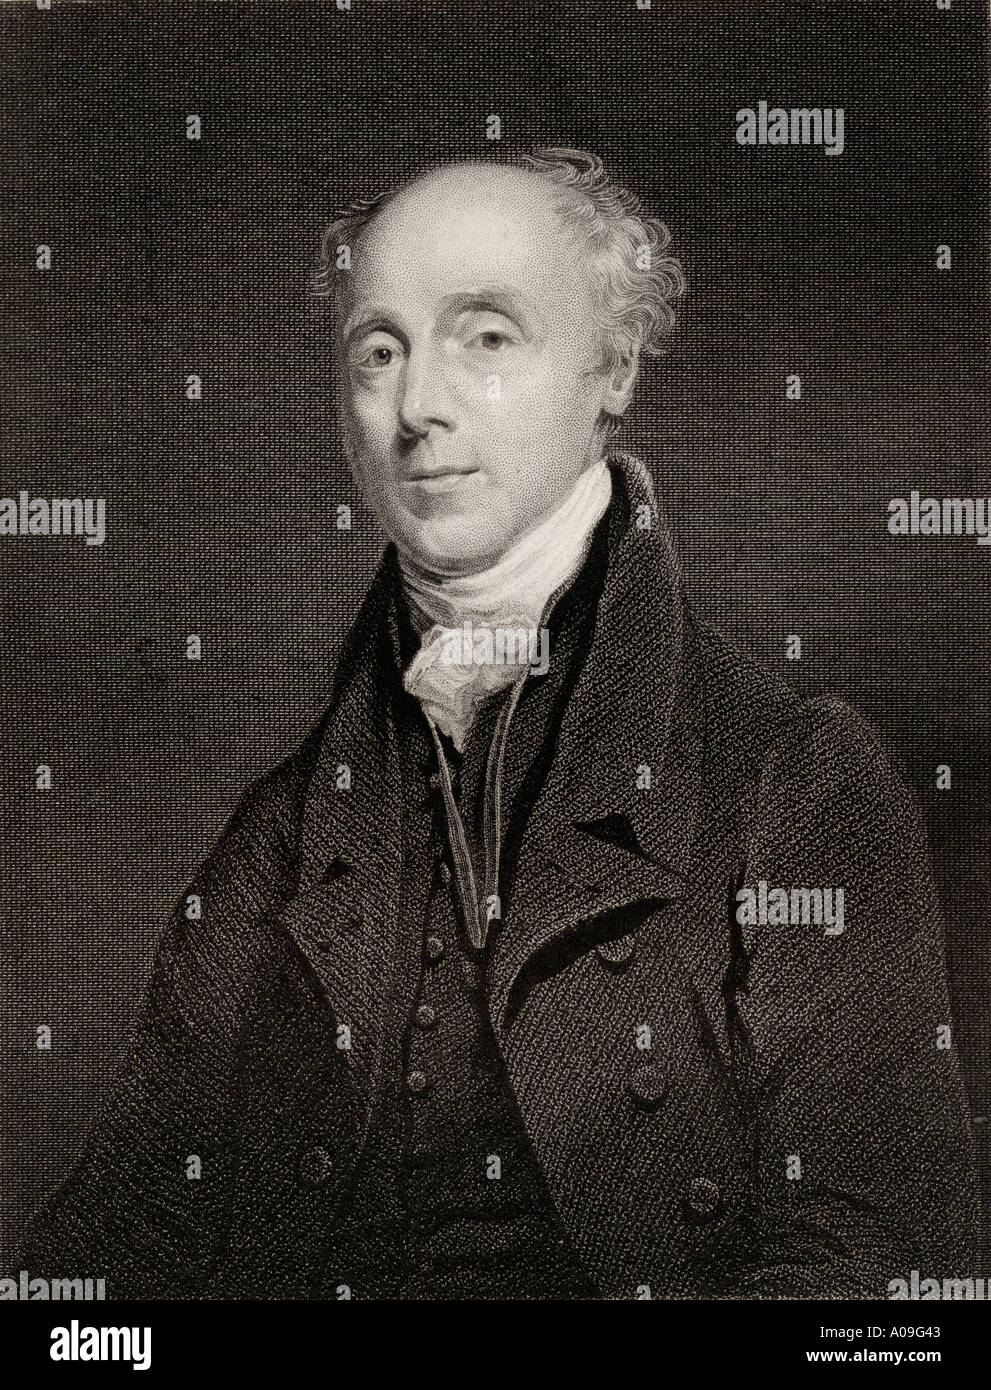 The Venerable Francis Wrangham, 1769 - 1842. Archdeacon of the East Riding of York, author, translator, book collector and abolitionist. Stock Photo